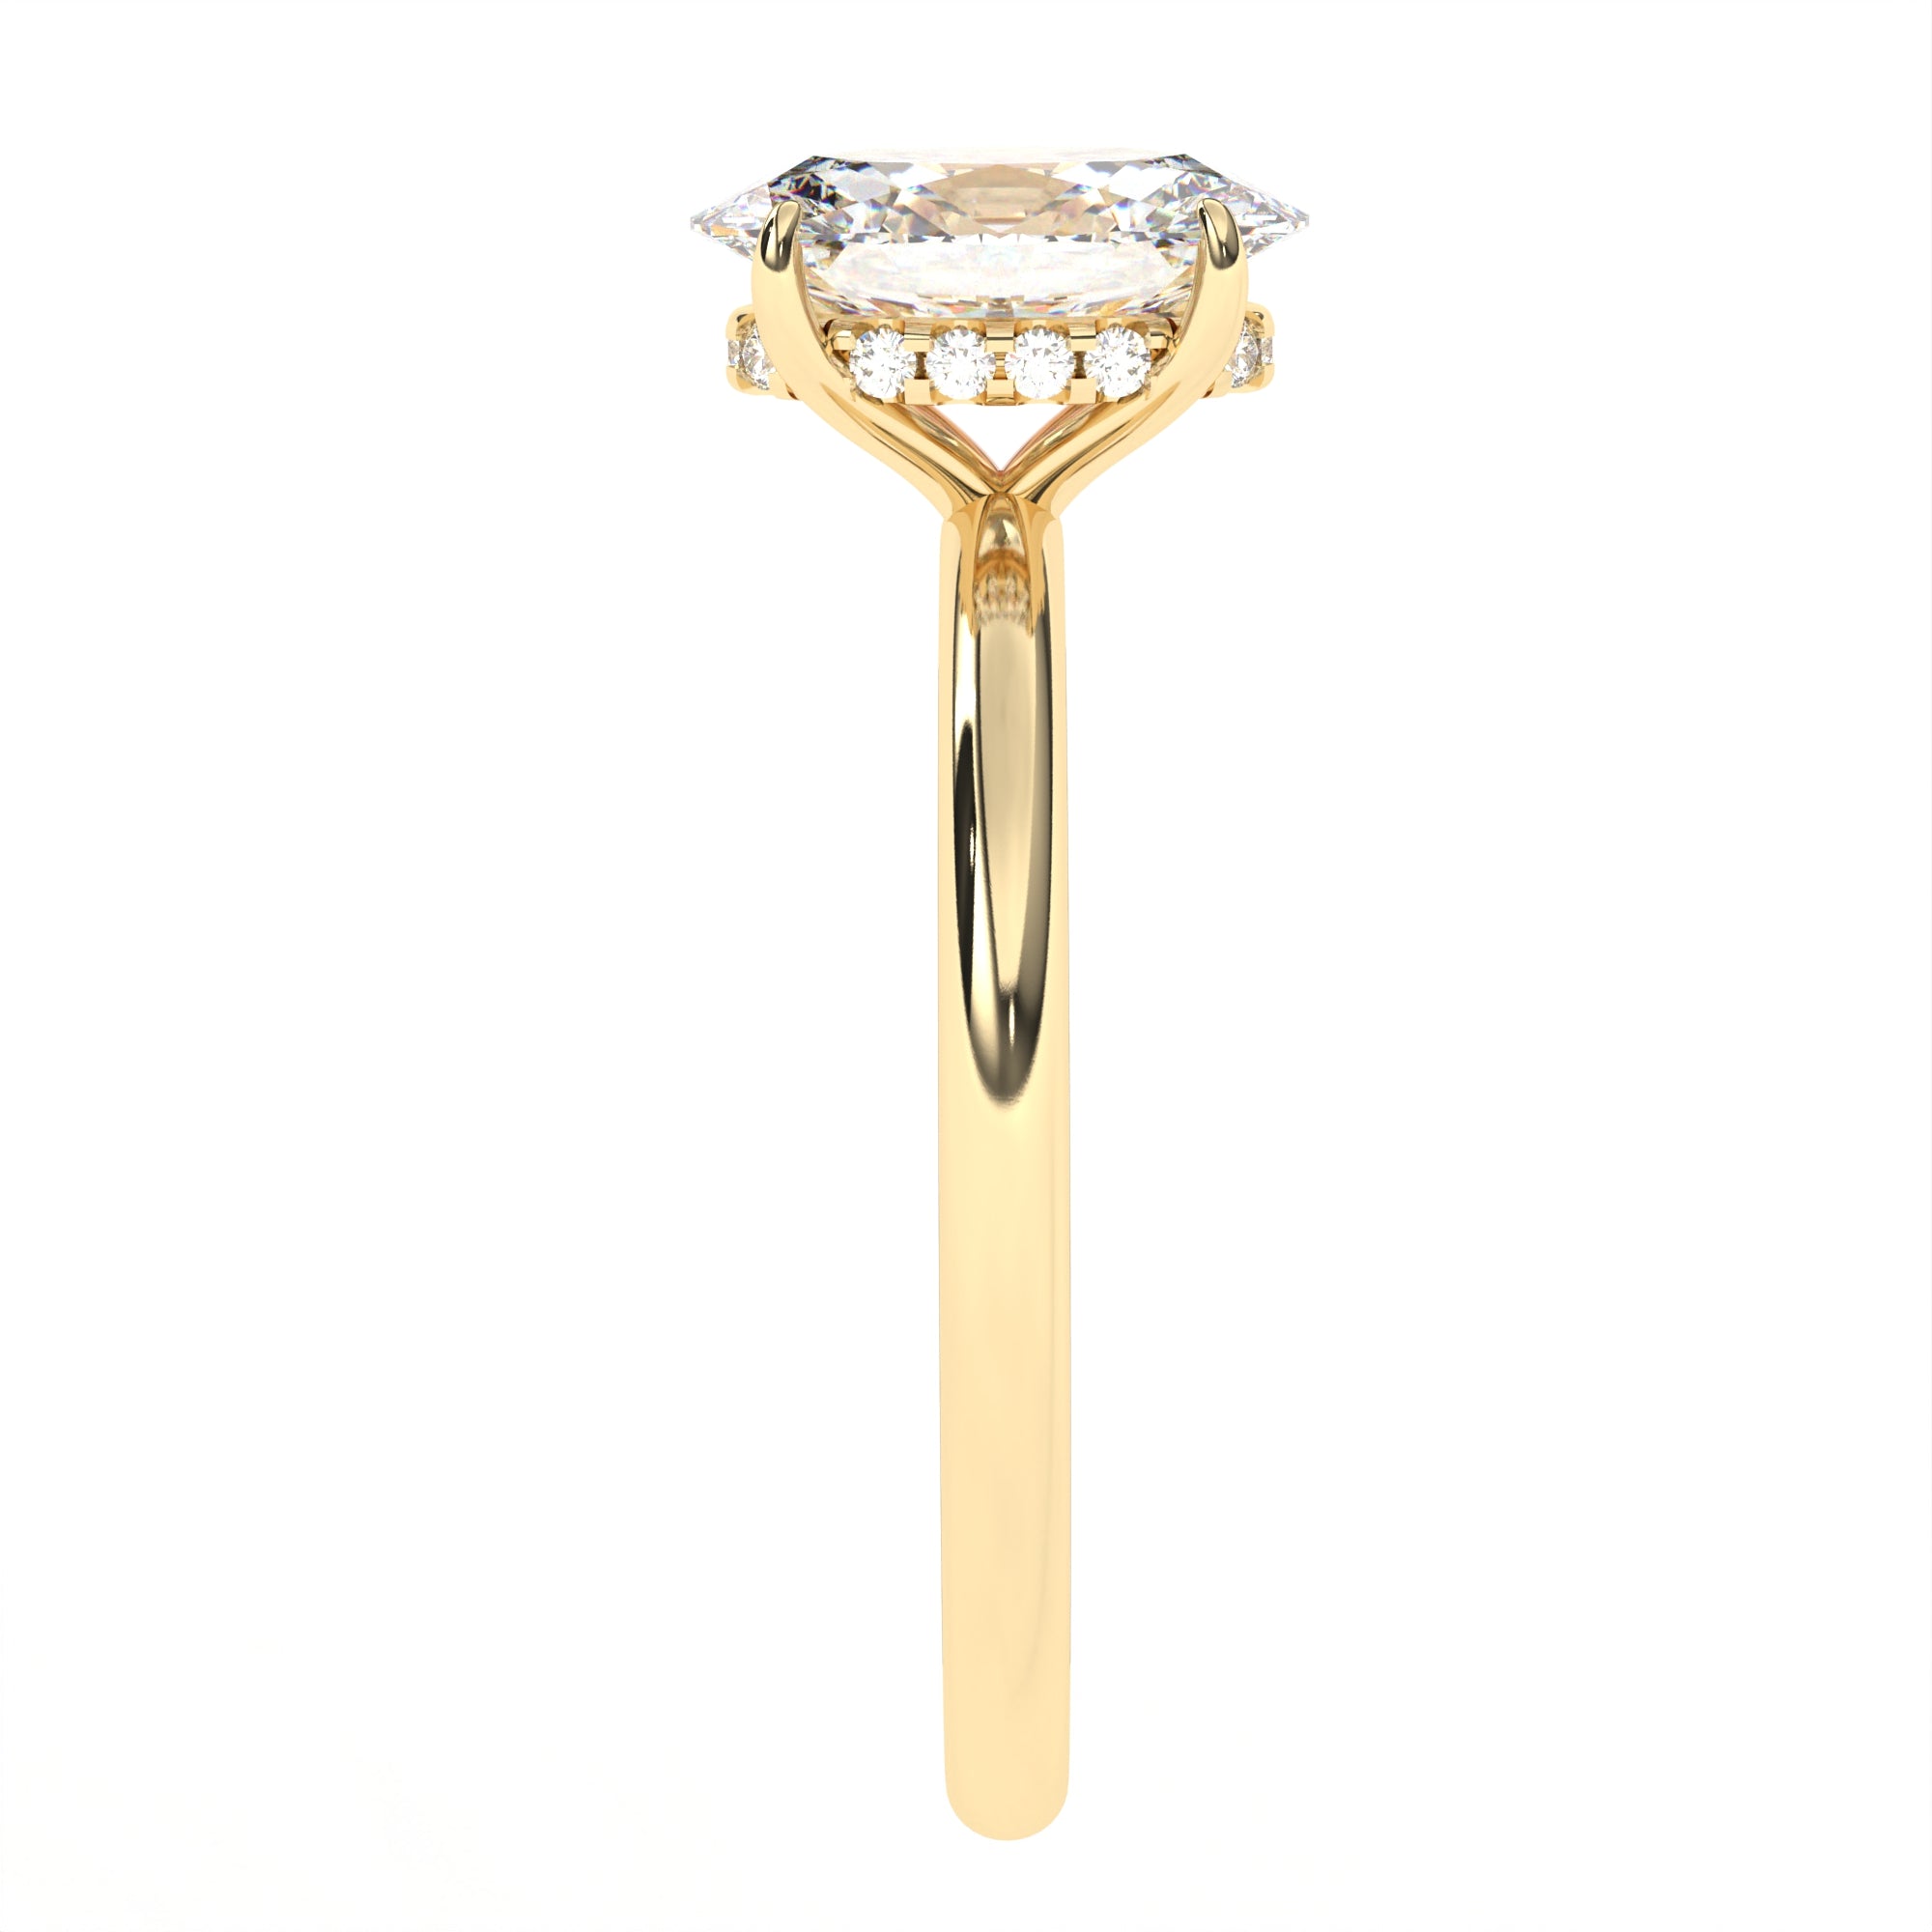 The Ophelia Ring - Elongated Cushion With Hidden Halo